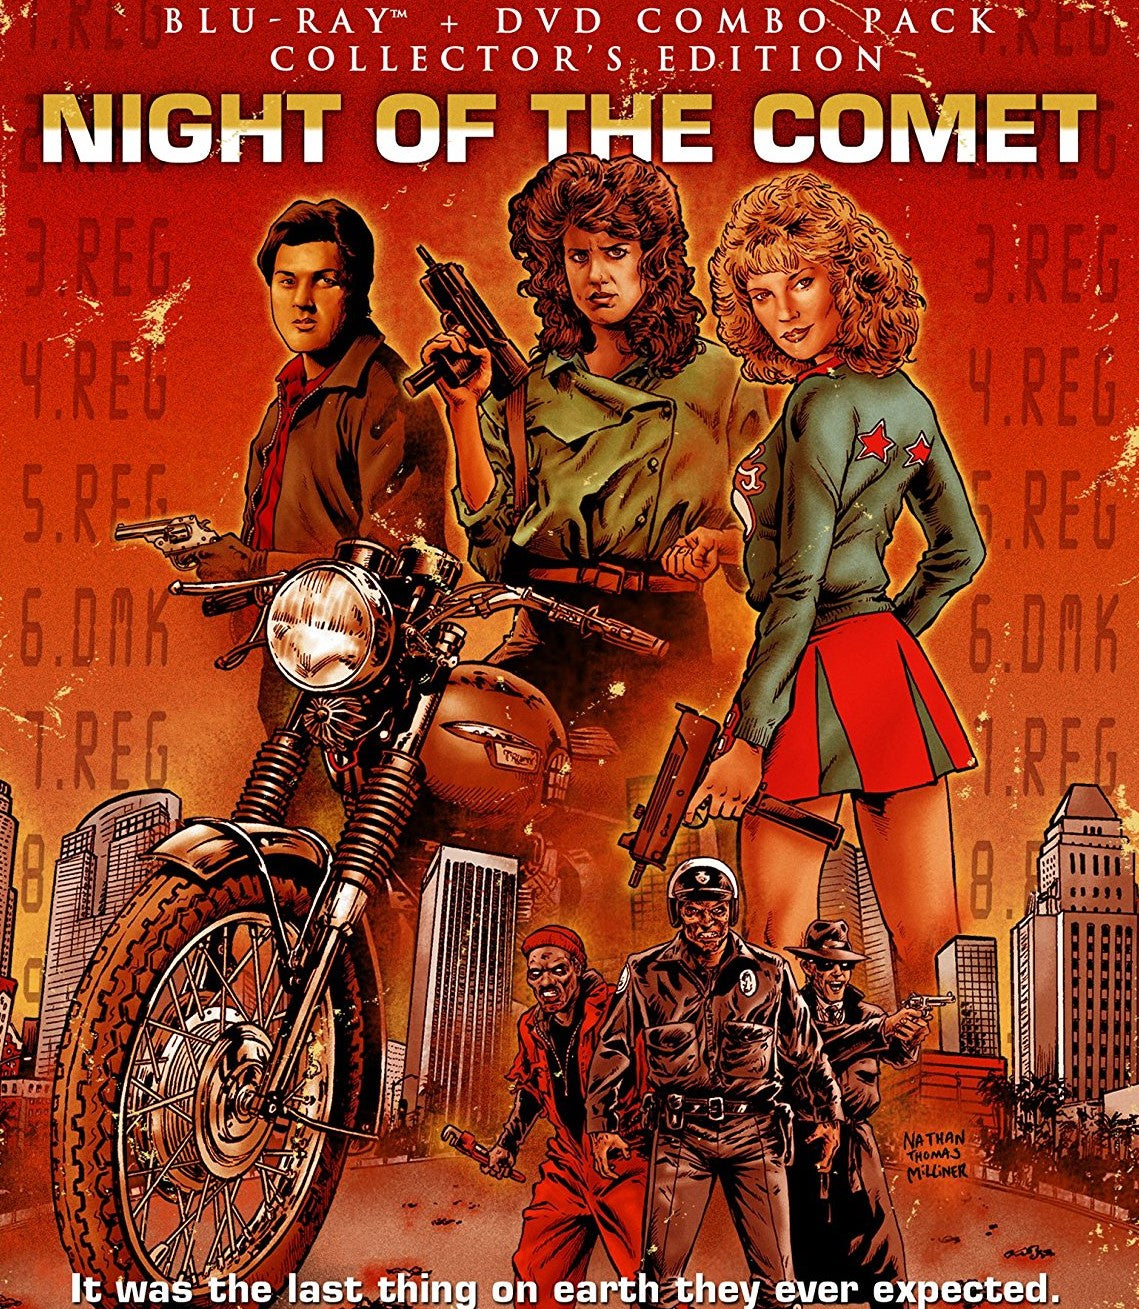 Night Of The Comet (Collectors Edition) Blu-Ray/dvd Blu-Ray